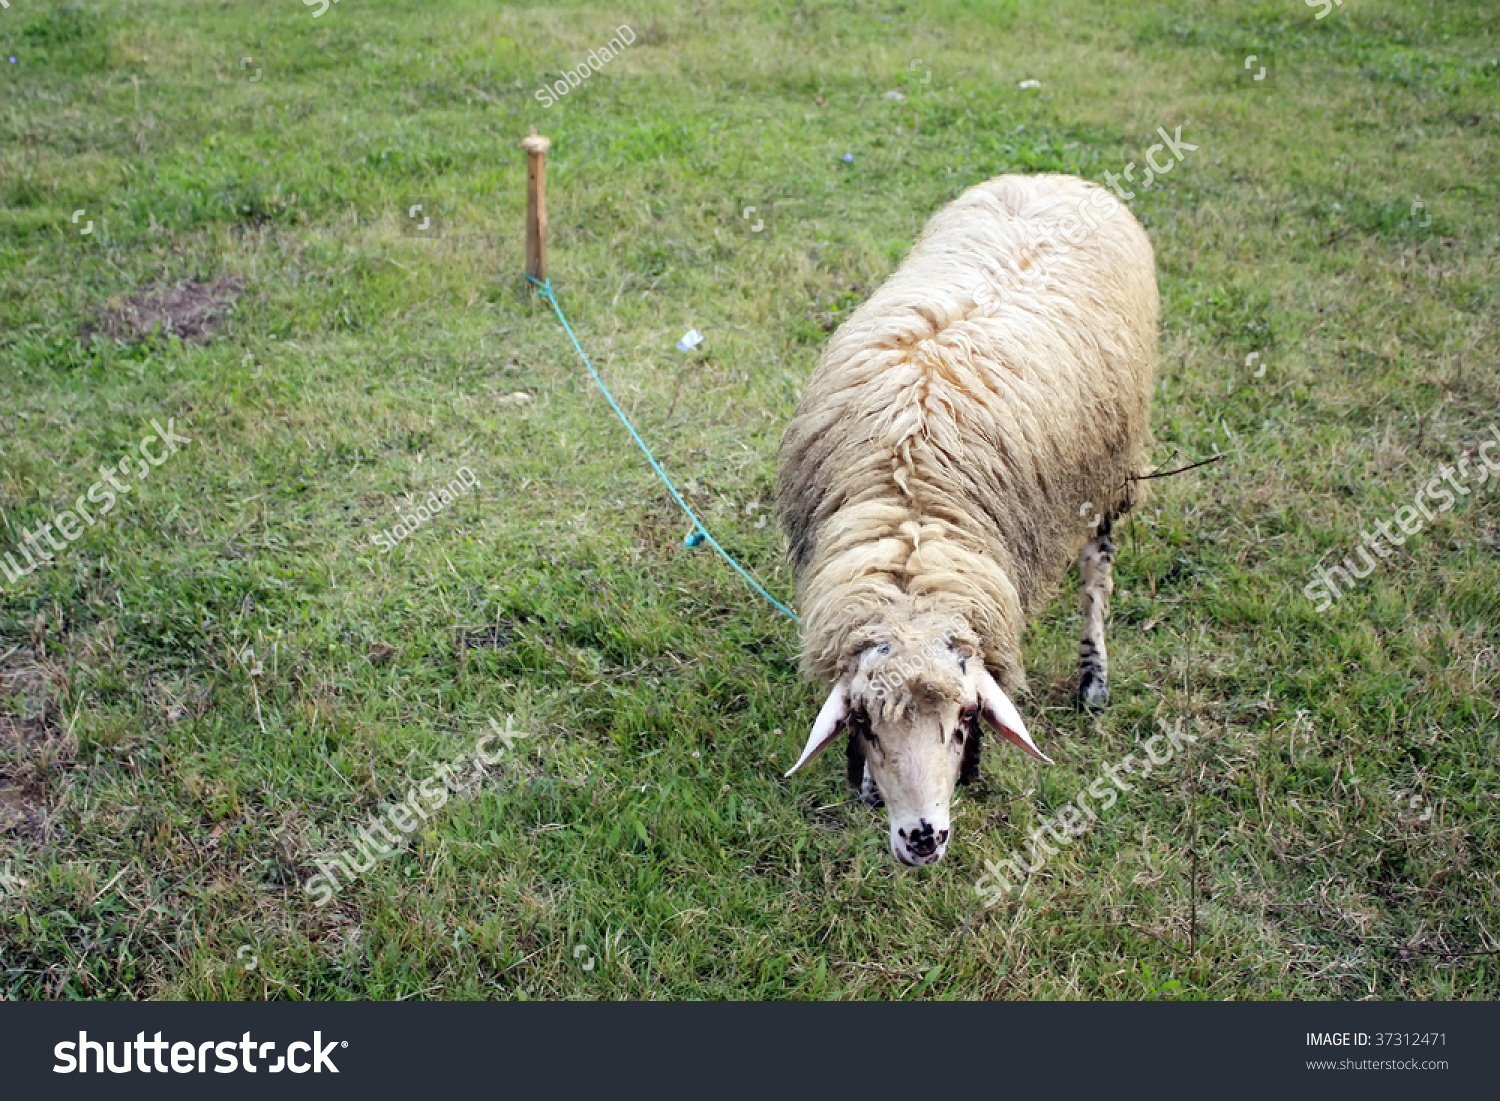 Sheep Tied Rope Stock Photo (Edit Now) 37312471